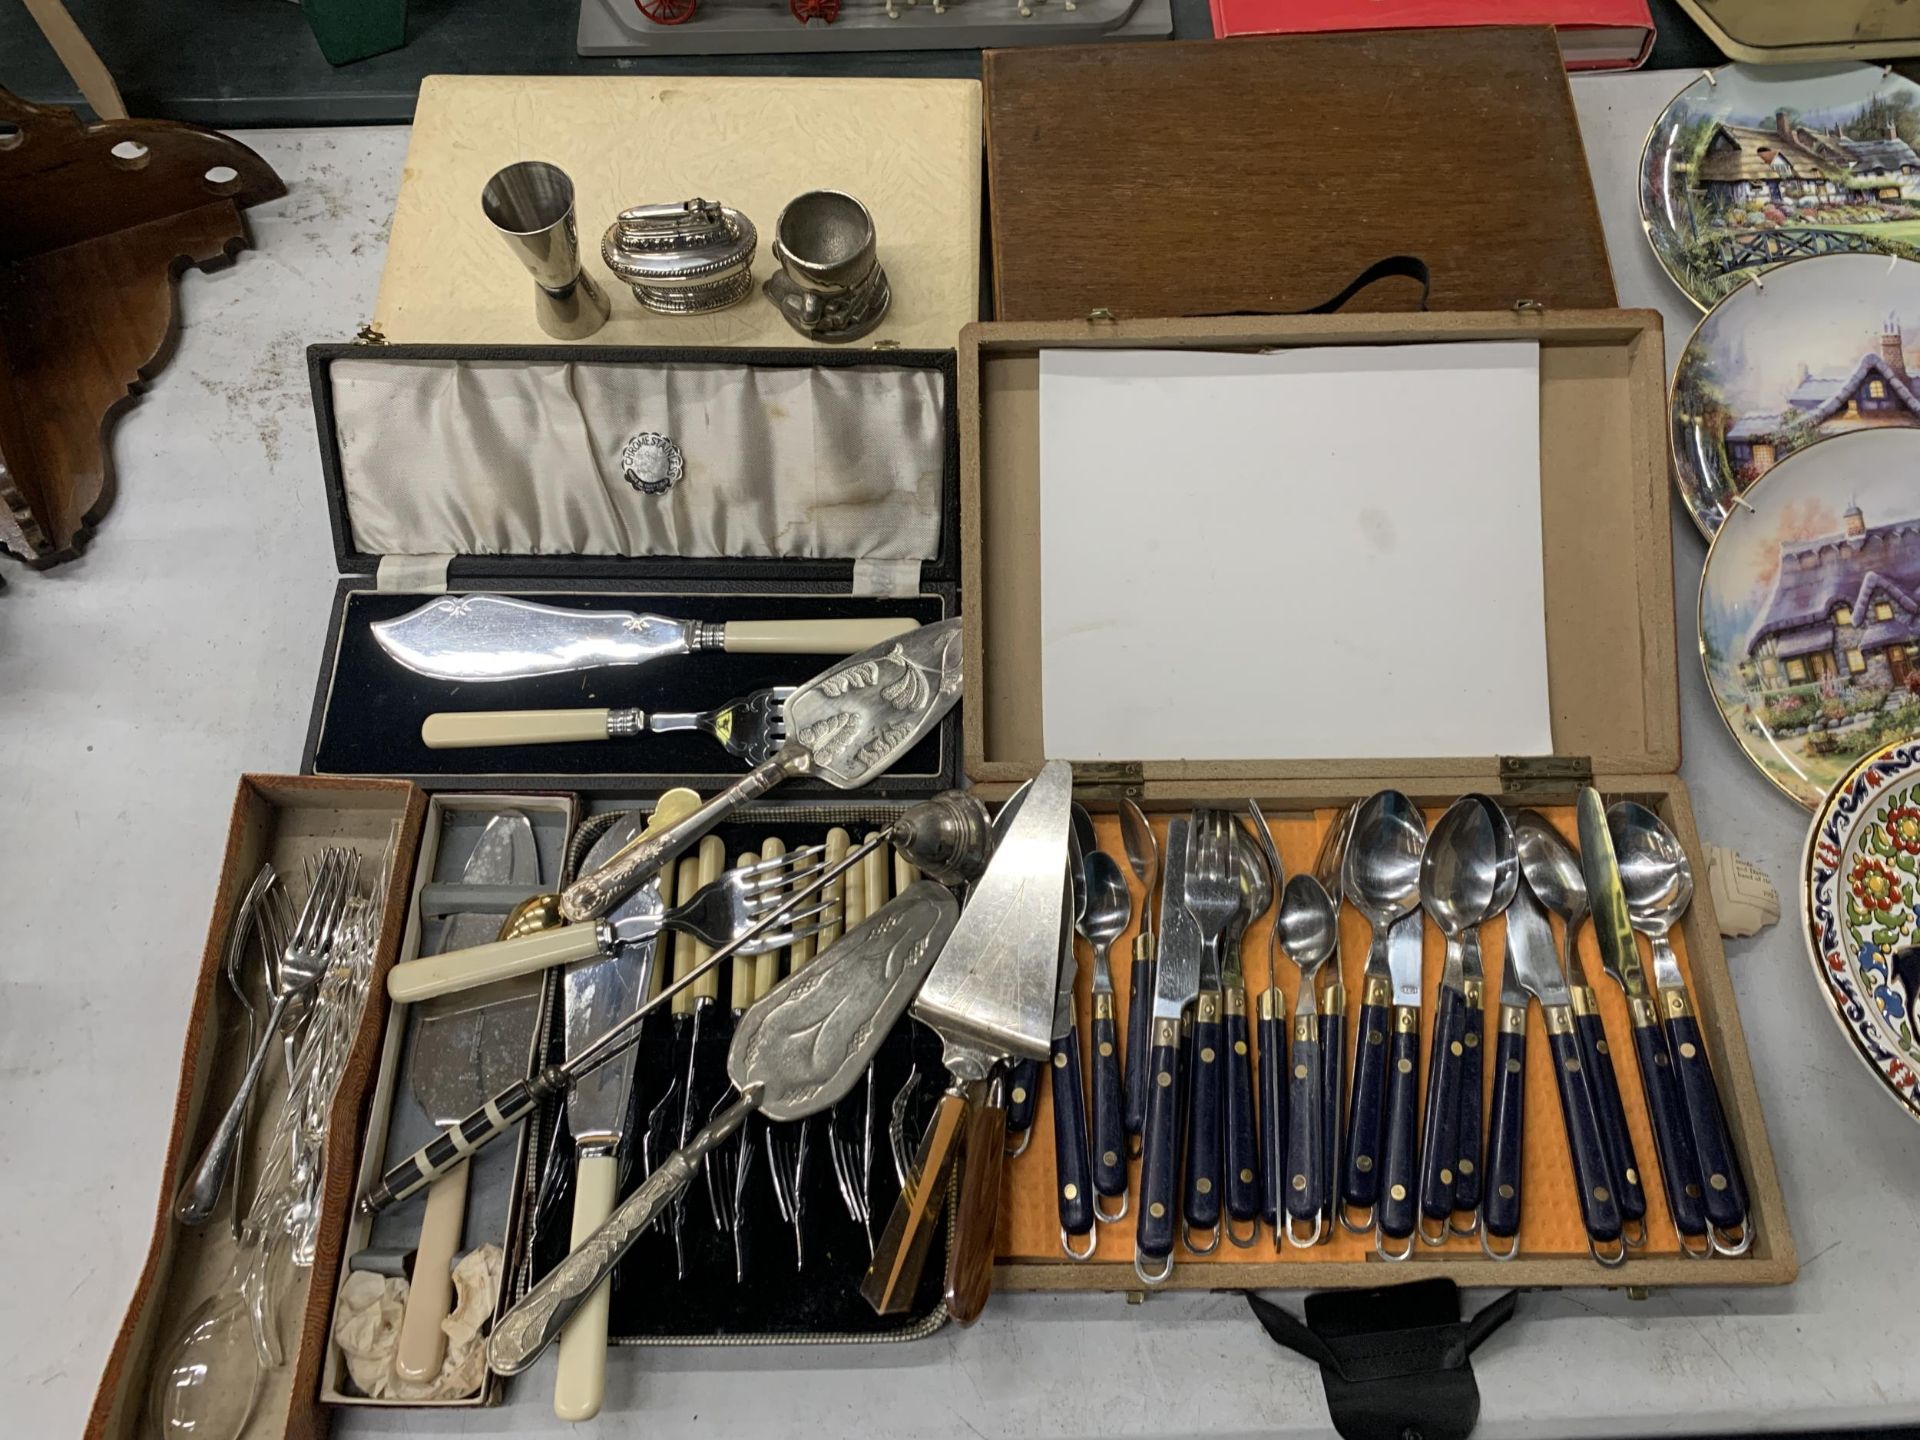 A QUANTITY OF VINTAGE FLATWARE, SOME BOXED, TO INCLUDE SERVING SETS PLUS A TABLE LIGHTER, ETC